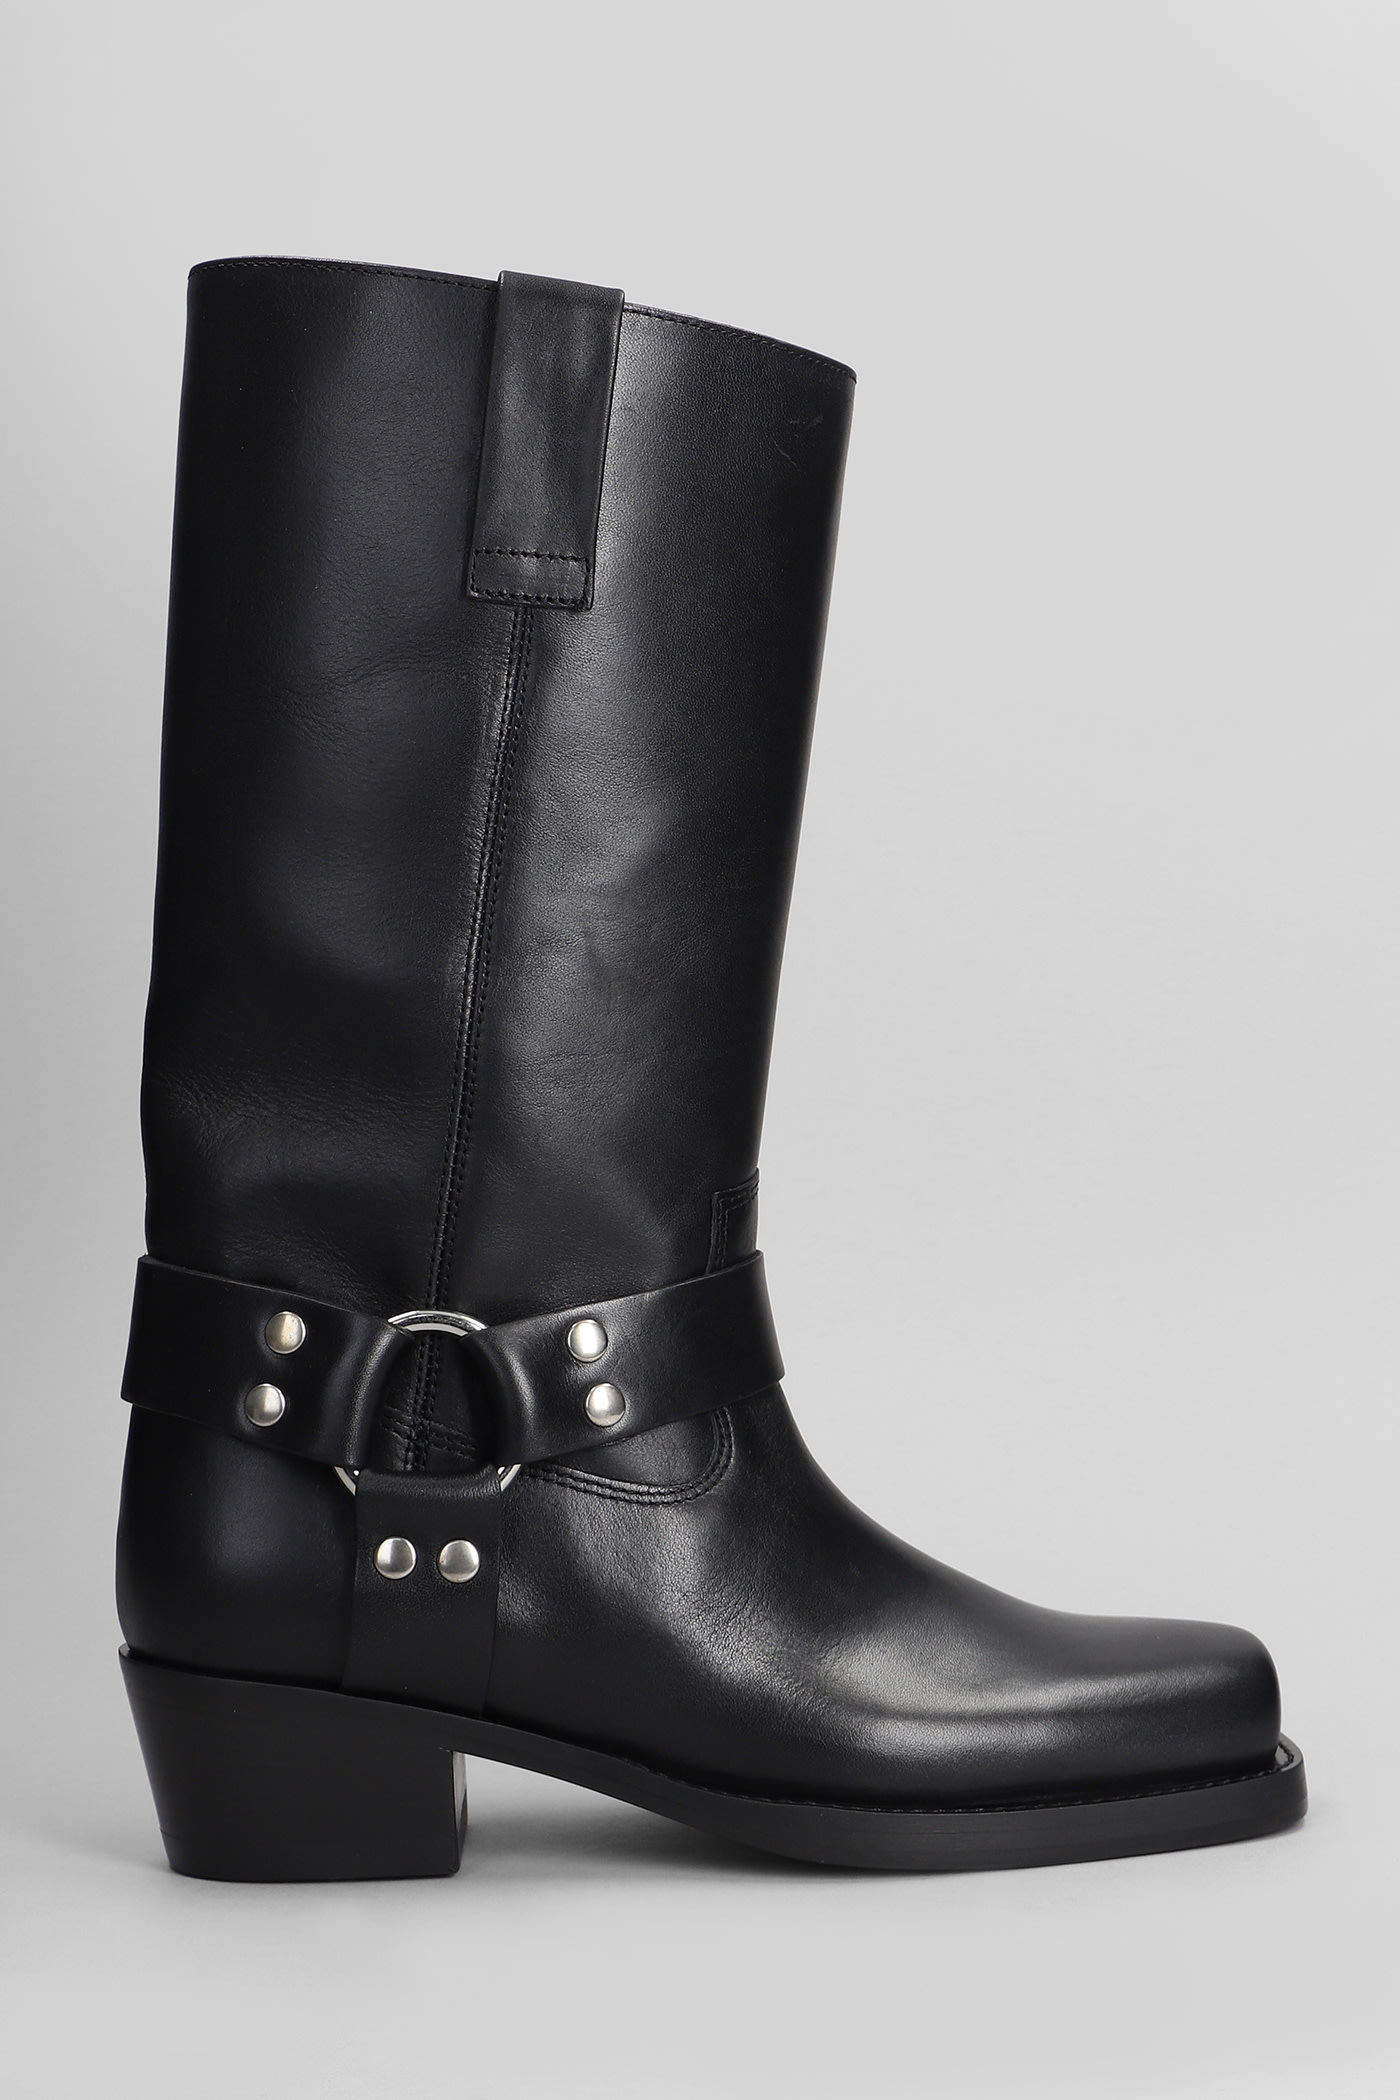 Roxy Boot Texan Ankle Boots In Black Leather